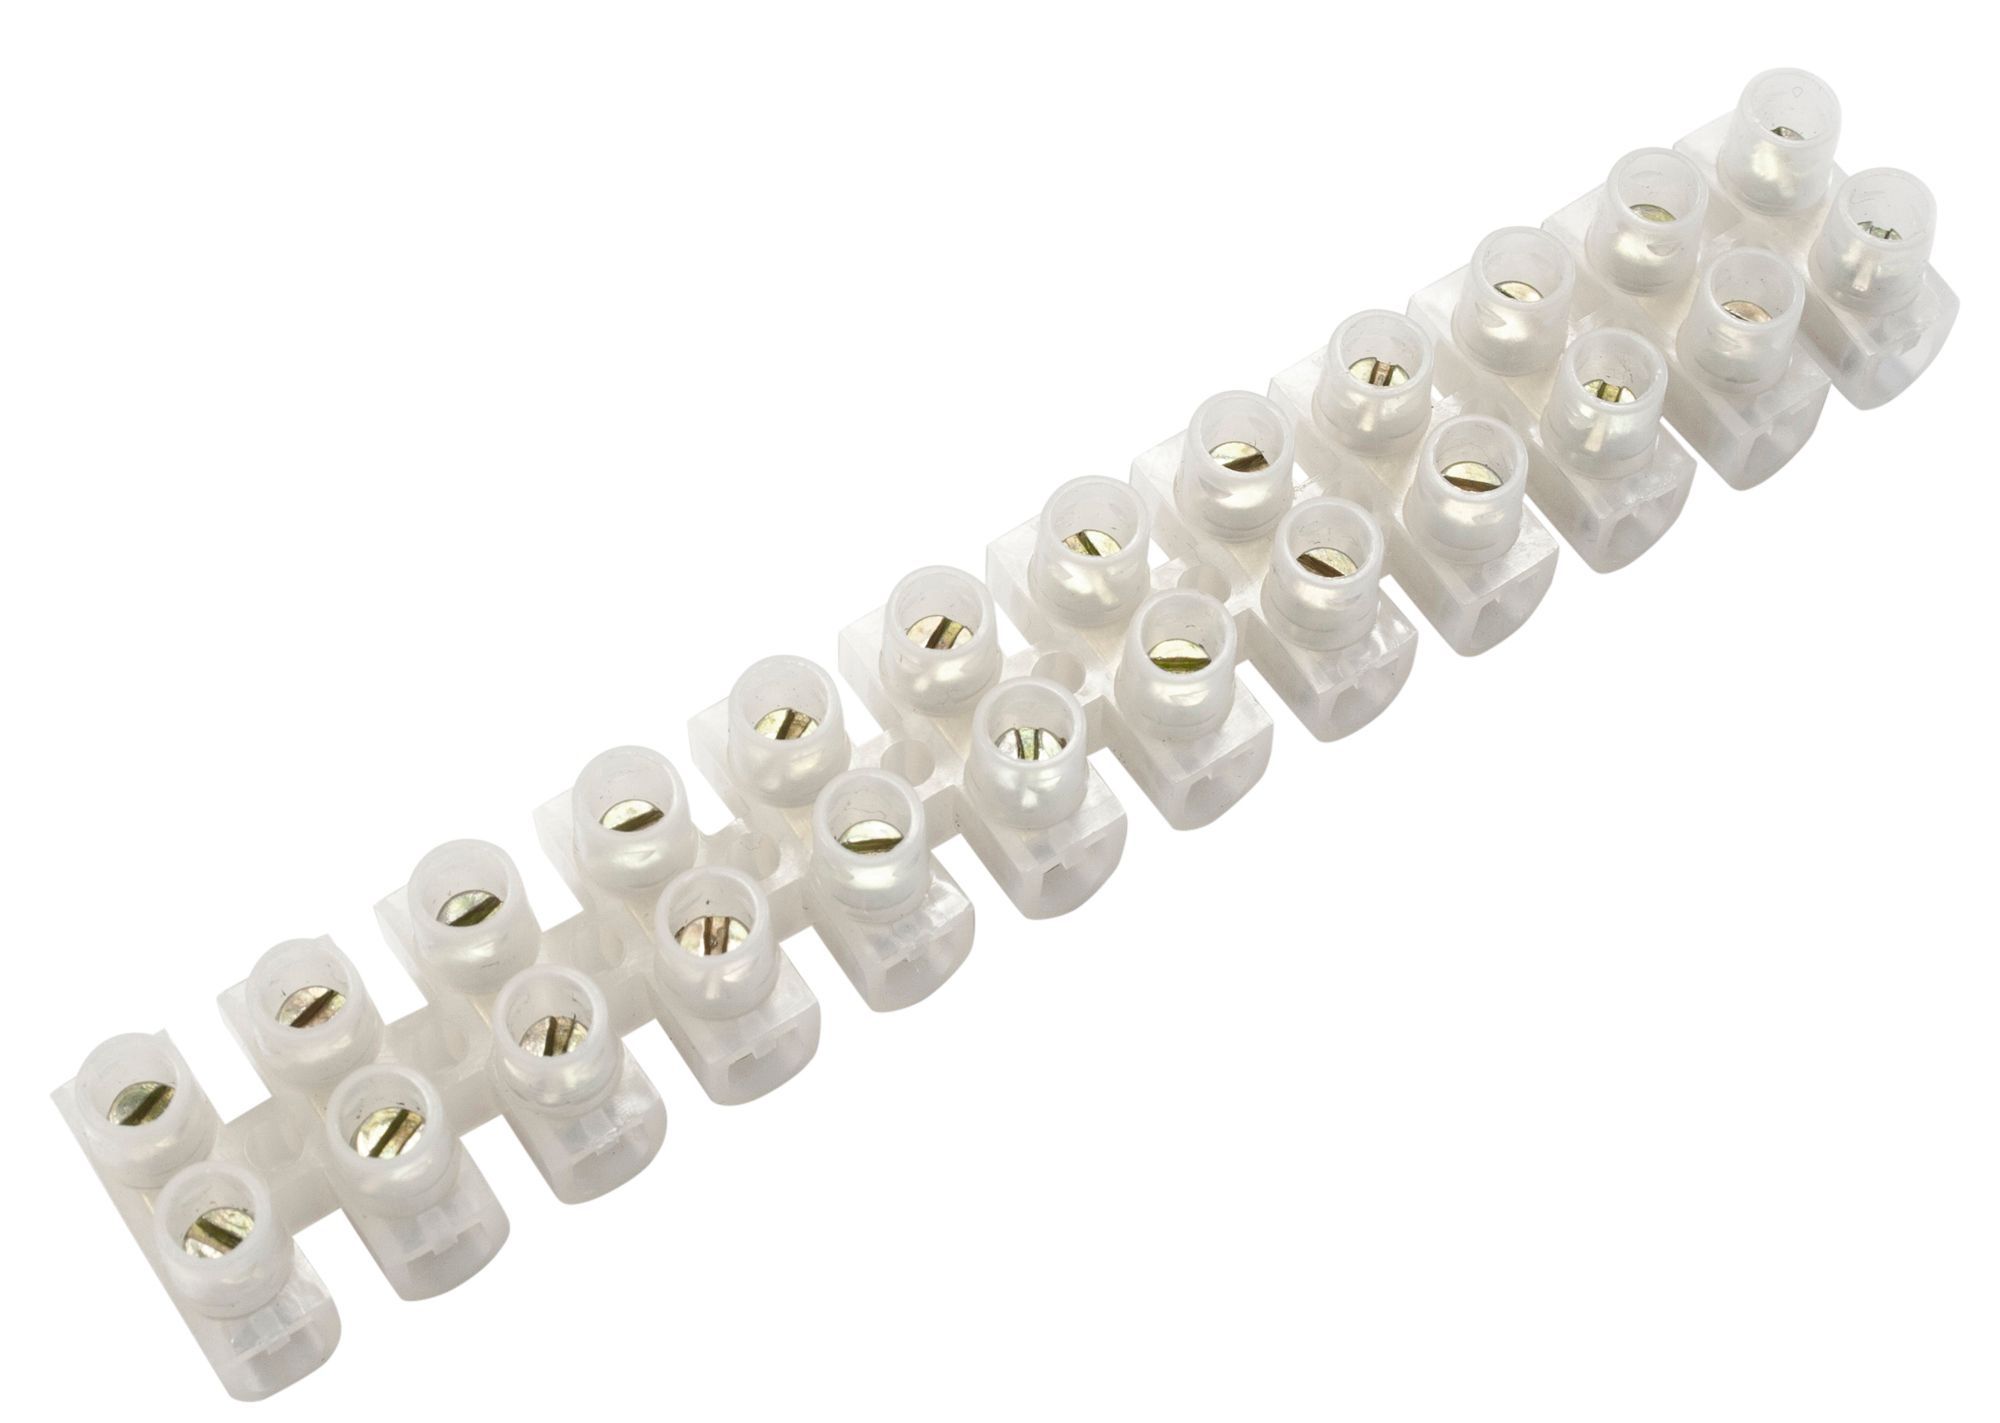 B&Q White 15A12 way Cable connector strip, Pack of 5